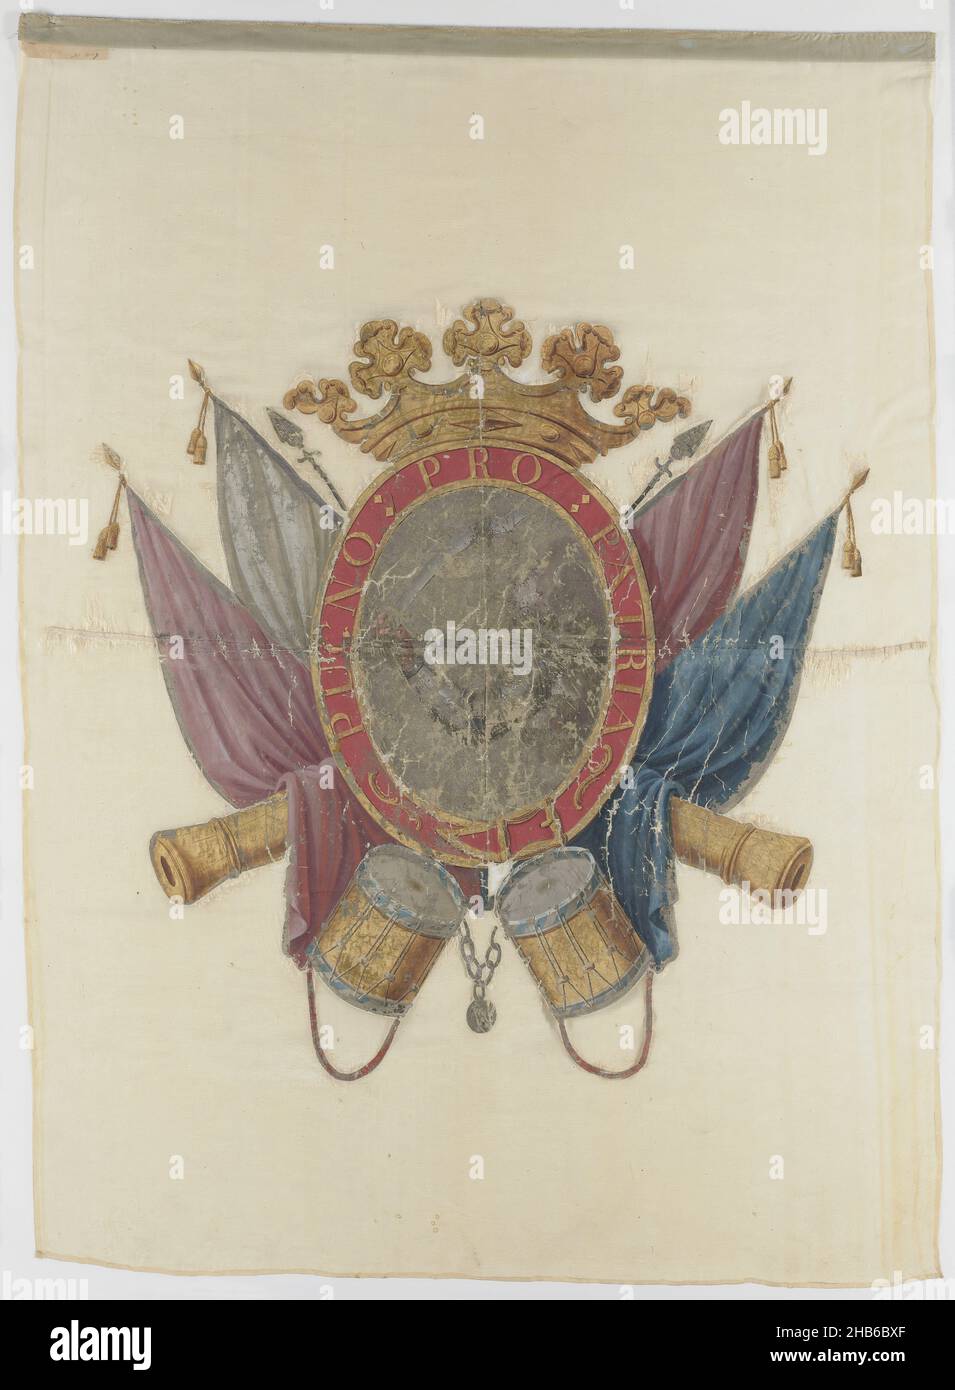 Banner of the regiment of Dutch Guards on foot, Ecru, on the center the full coat of arms of Orange-Nassau, as wielded by William IV and William V, surrounded by the Order of the Garter, covered by a king's crown. The whole is placed on a trophy of cannons, bows, lances, drums, banners etc. Around it two bent branches held together at the bottom by an orange ribbon. In the lower corner on the stick side and the top of the flight a little arm with scimitar on which (in the top of the flight still partially legible) at the top of the shoulder: PRO PATRIA. In the upper neck and flight angle a Stock Photo